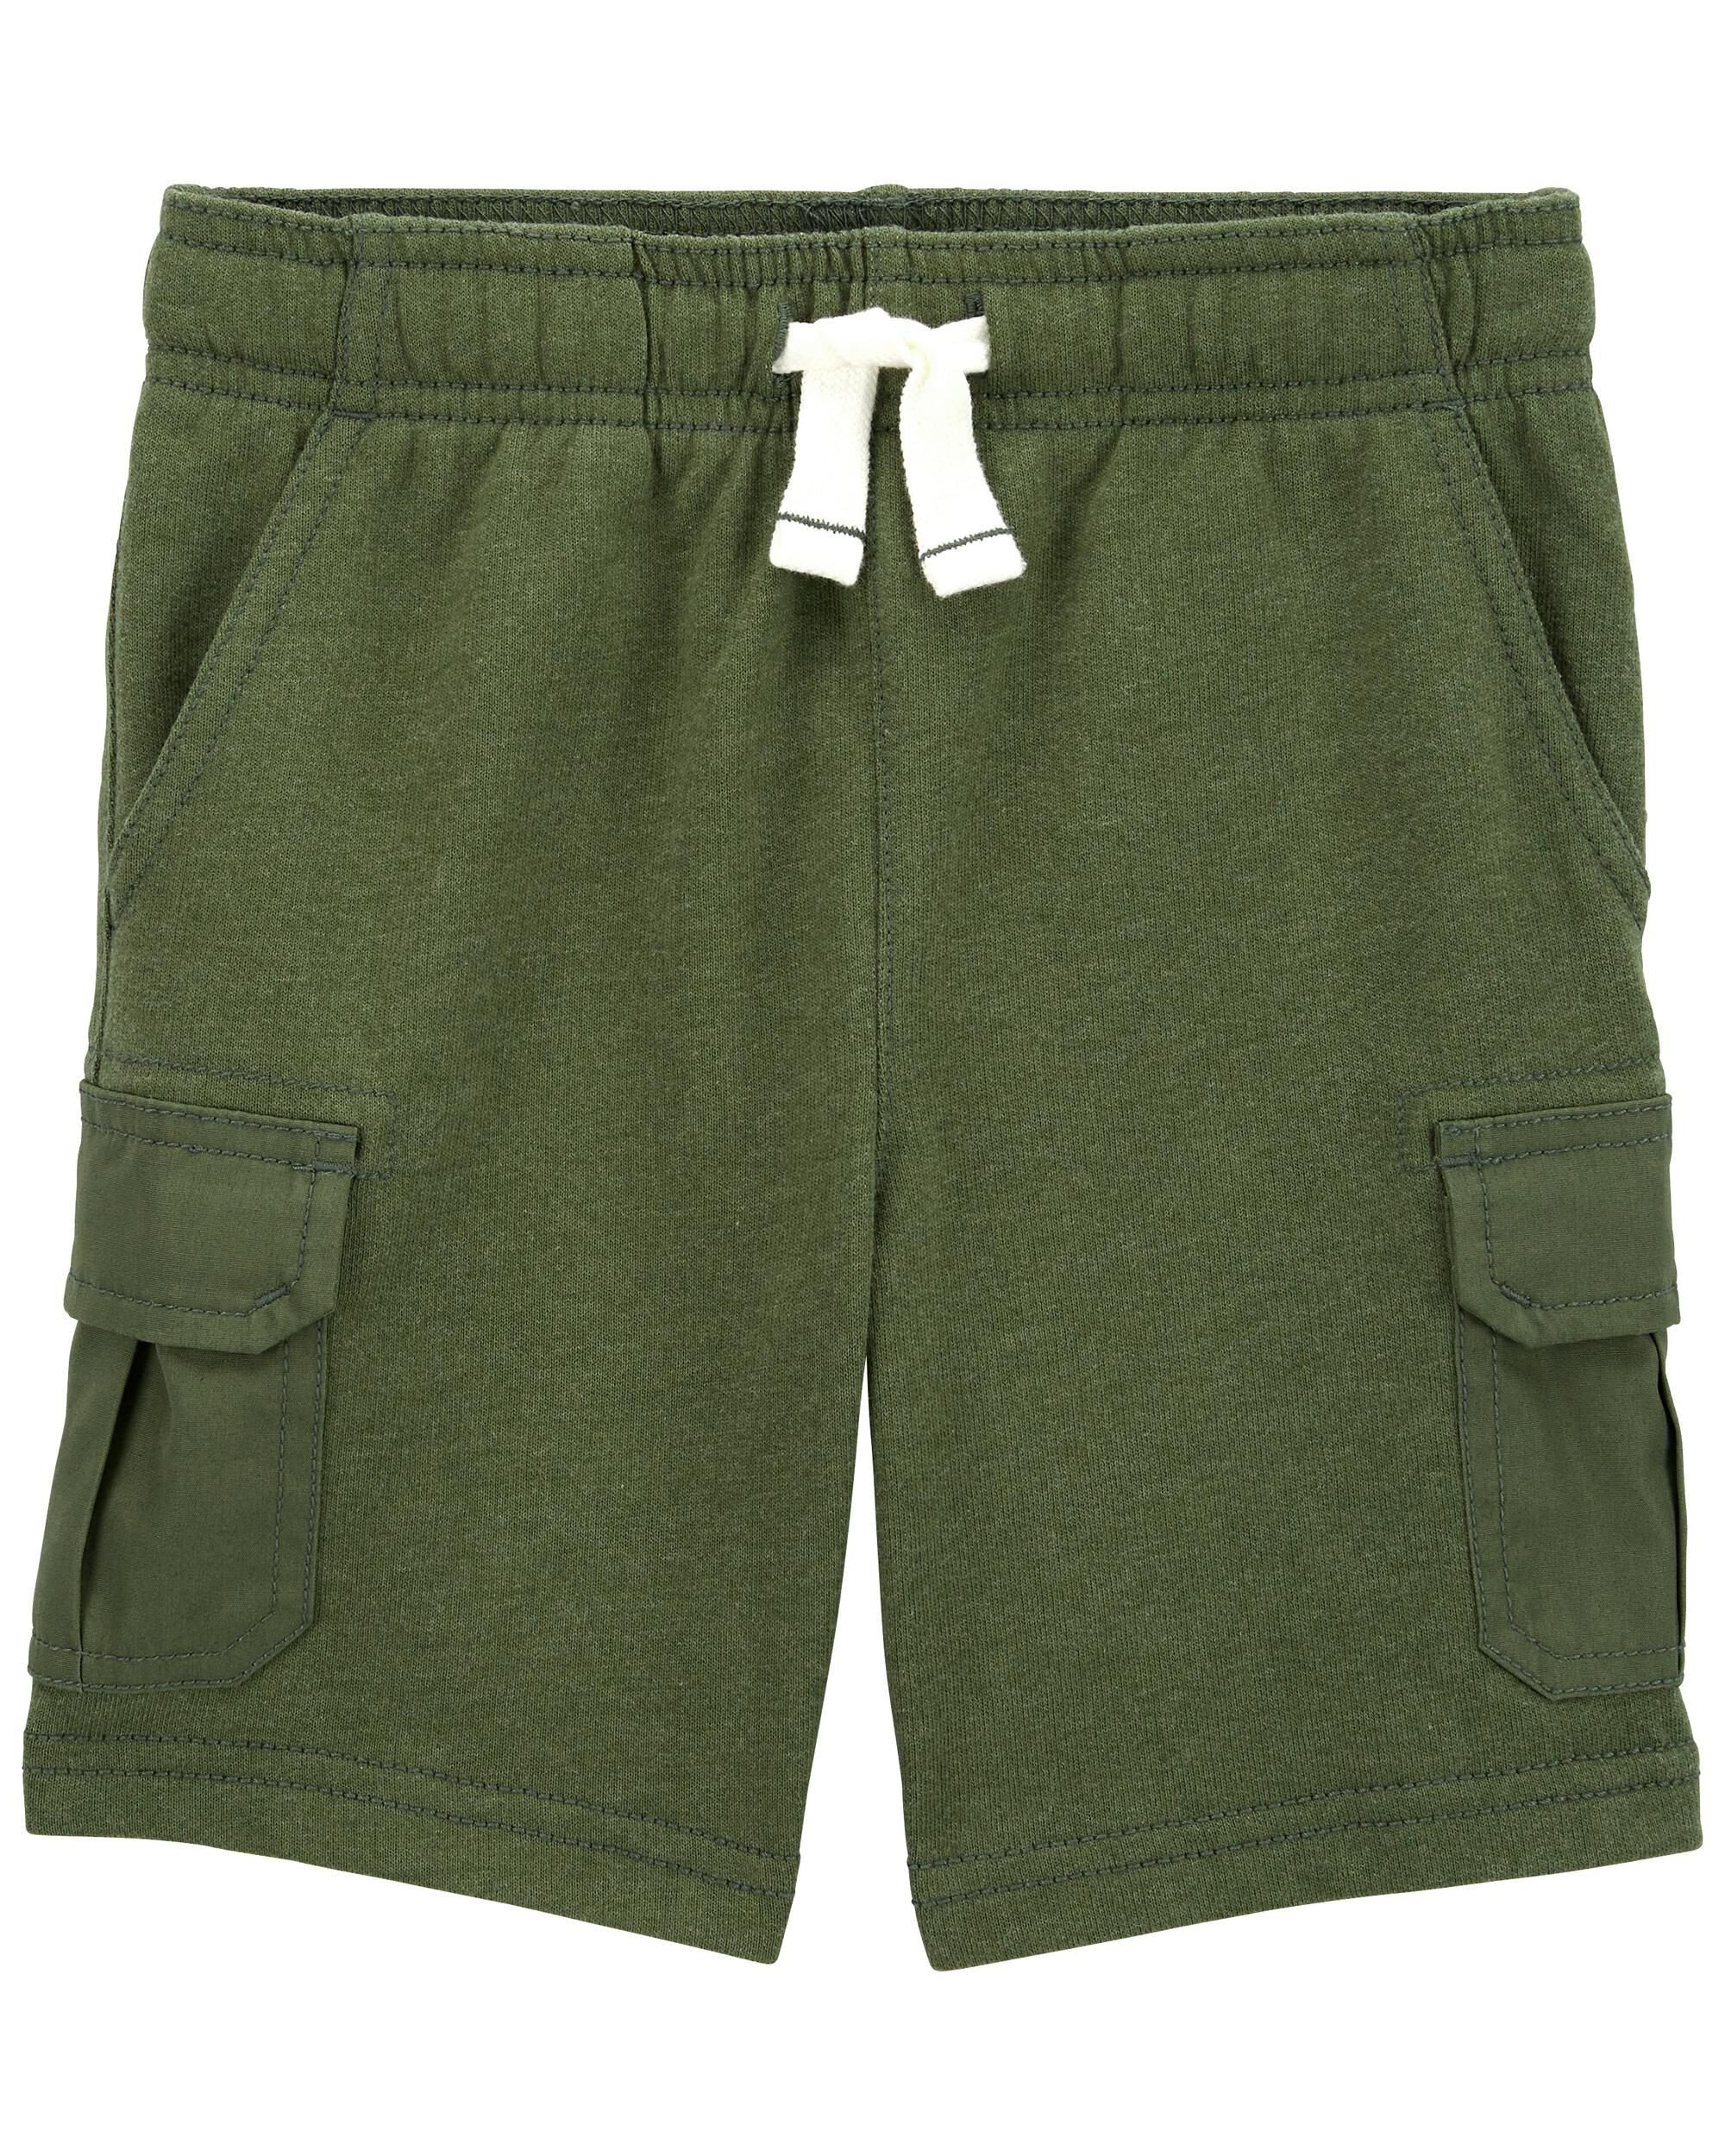 Simple Joys by Carters Boys Toddler 2-Pack Flat Front Shorts 